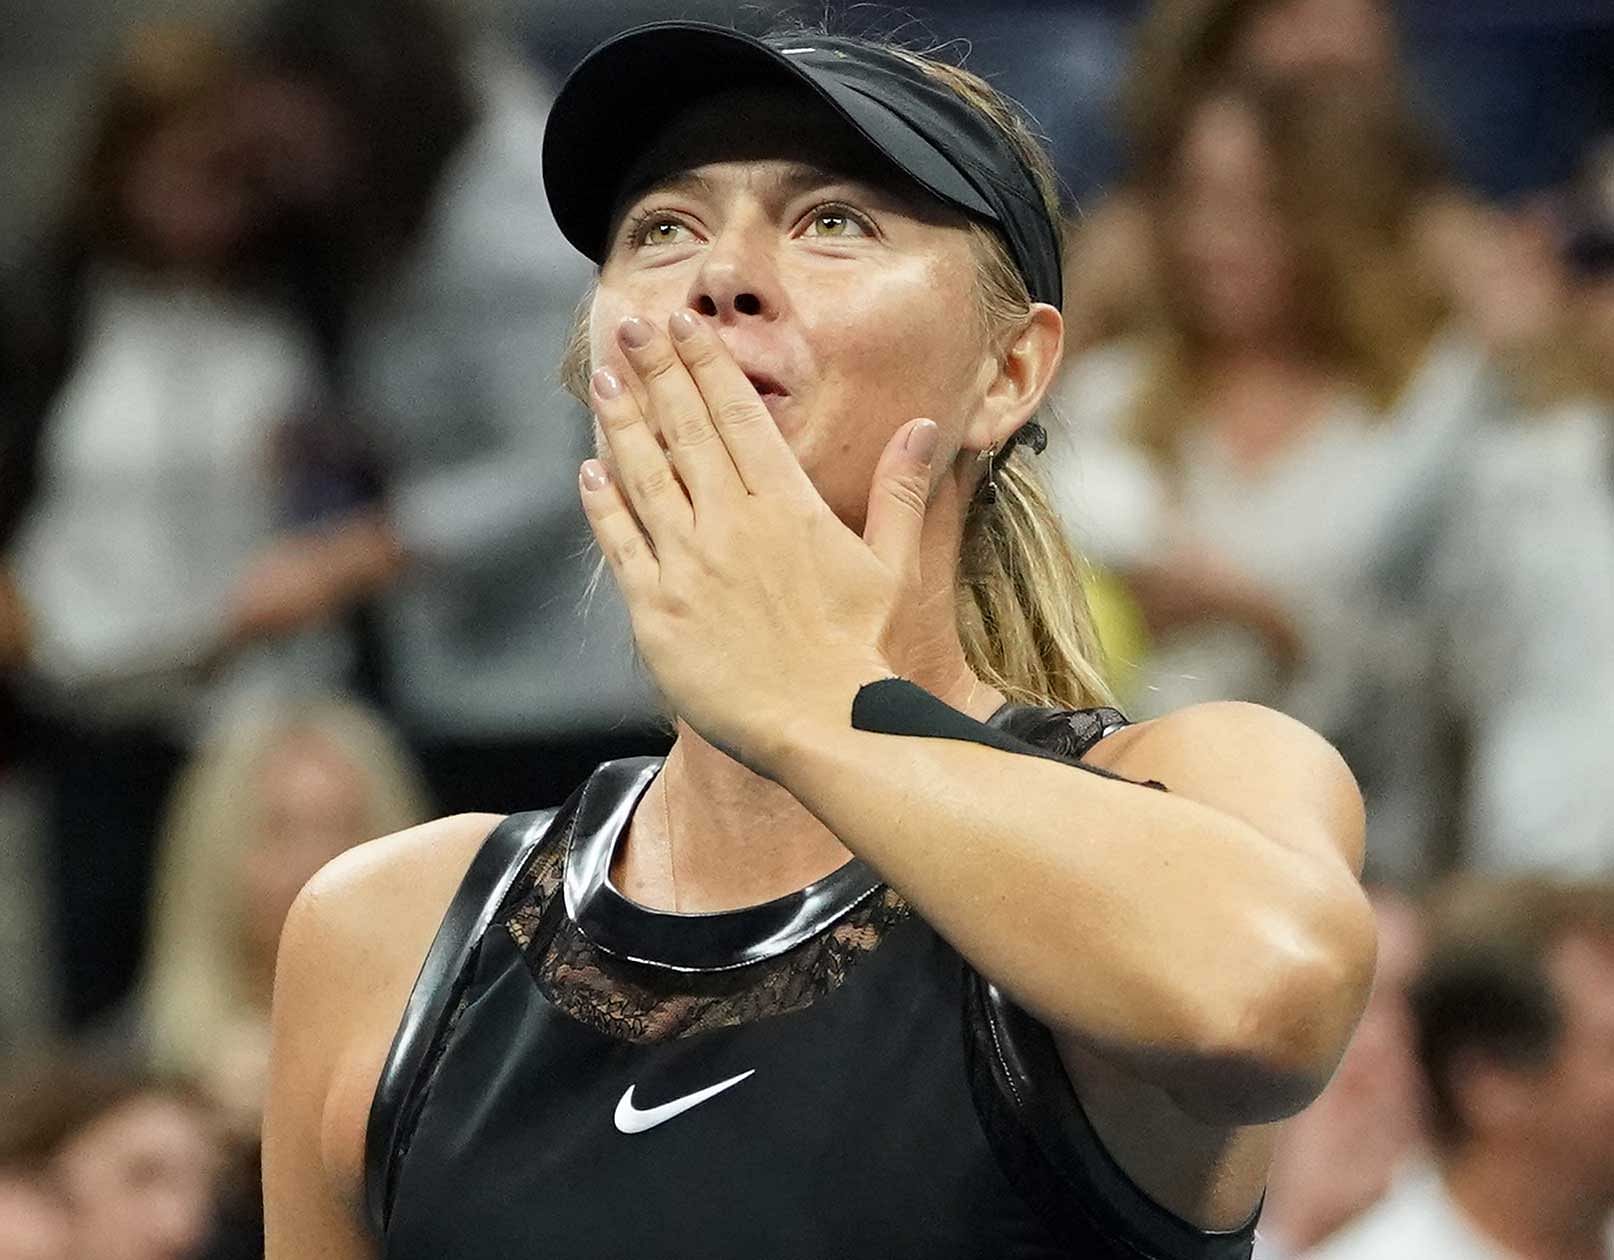 Maria Sharapova of Russia after beating Sofia Kenin of the USA in Ashe Stadium at the USTA Billie Jean King National Tennis Center. Reuters photo